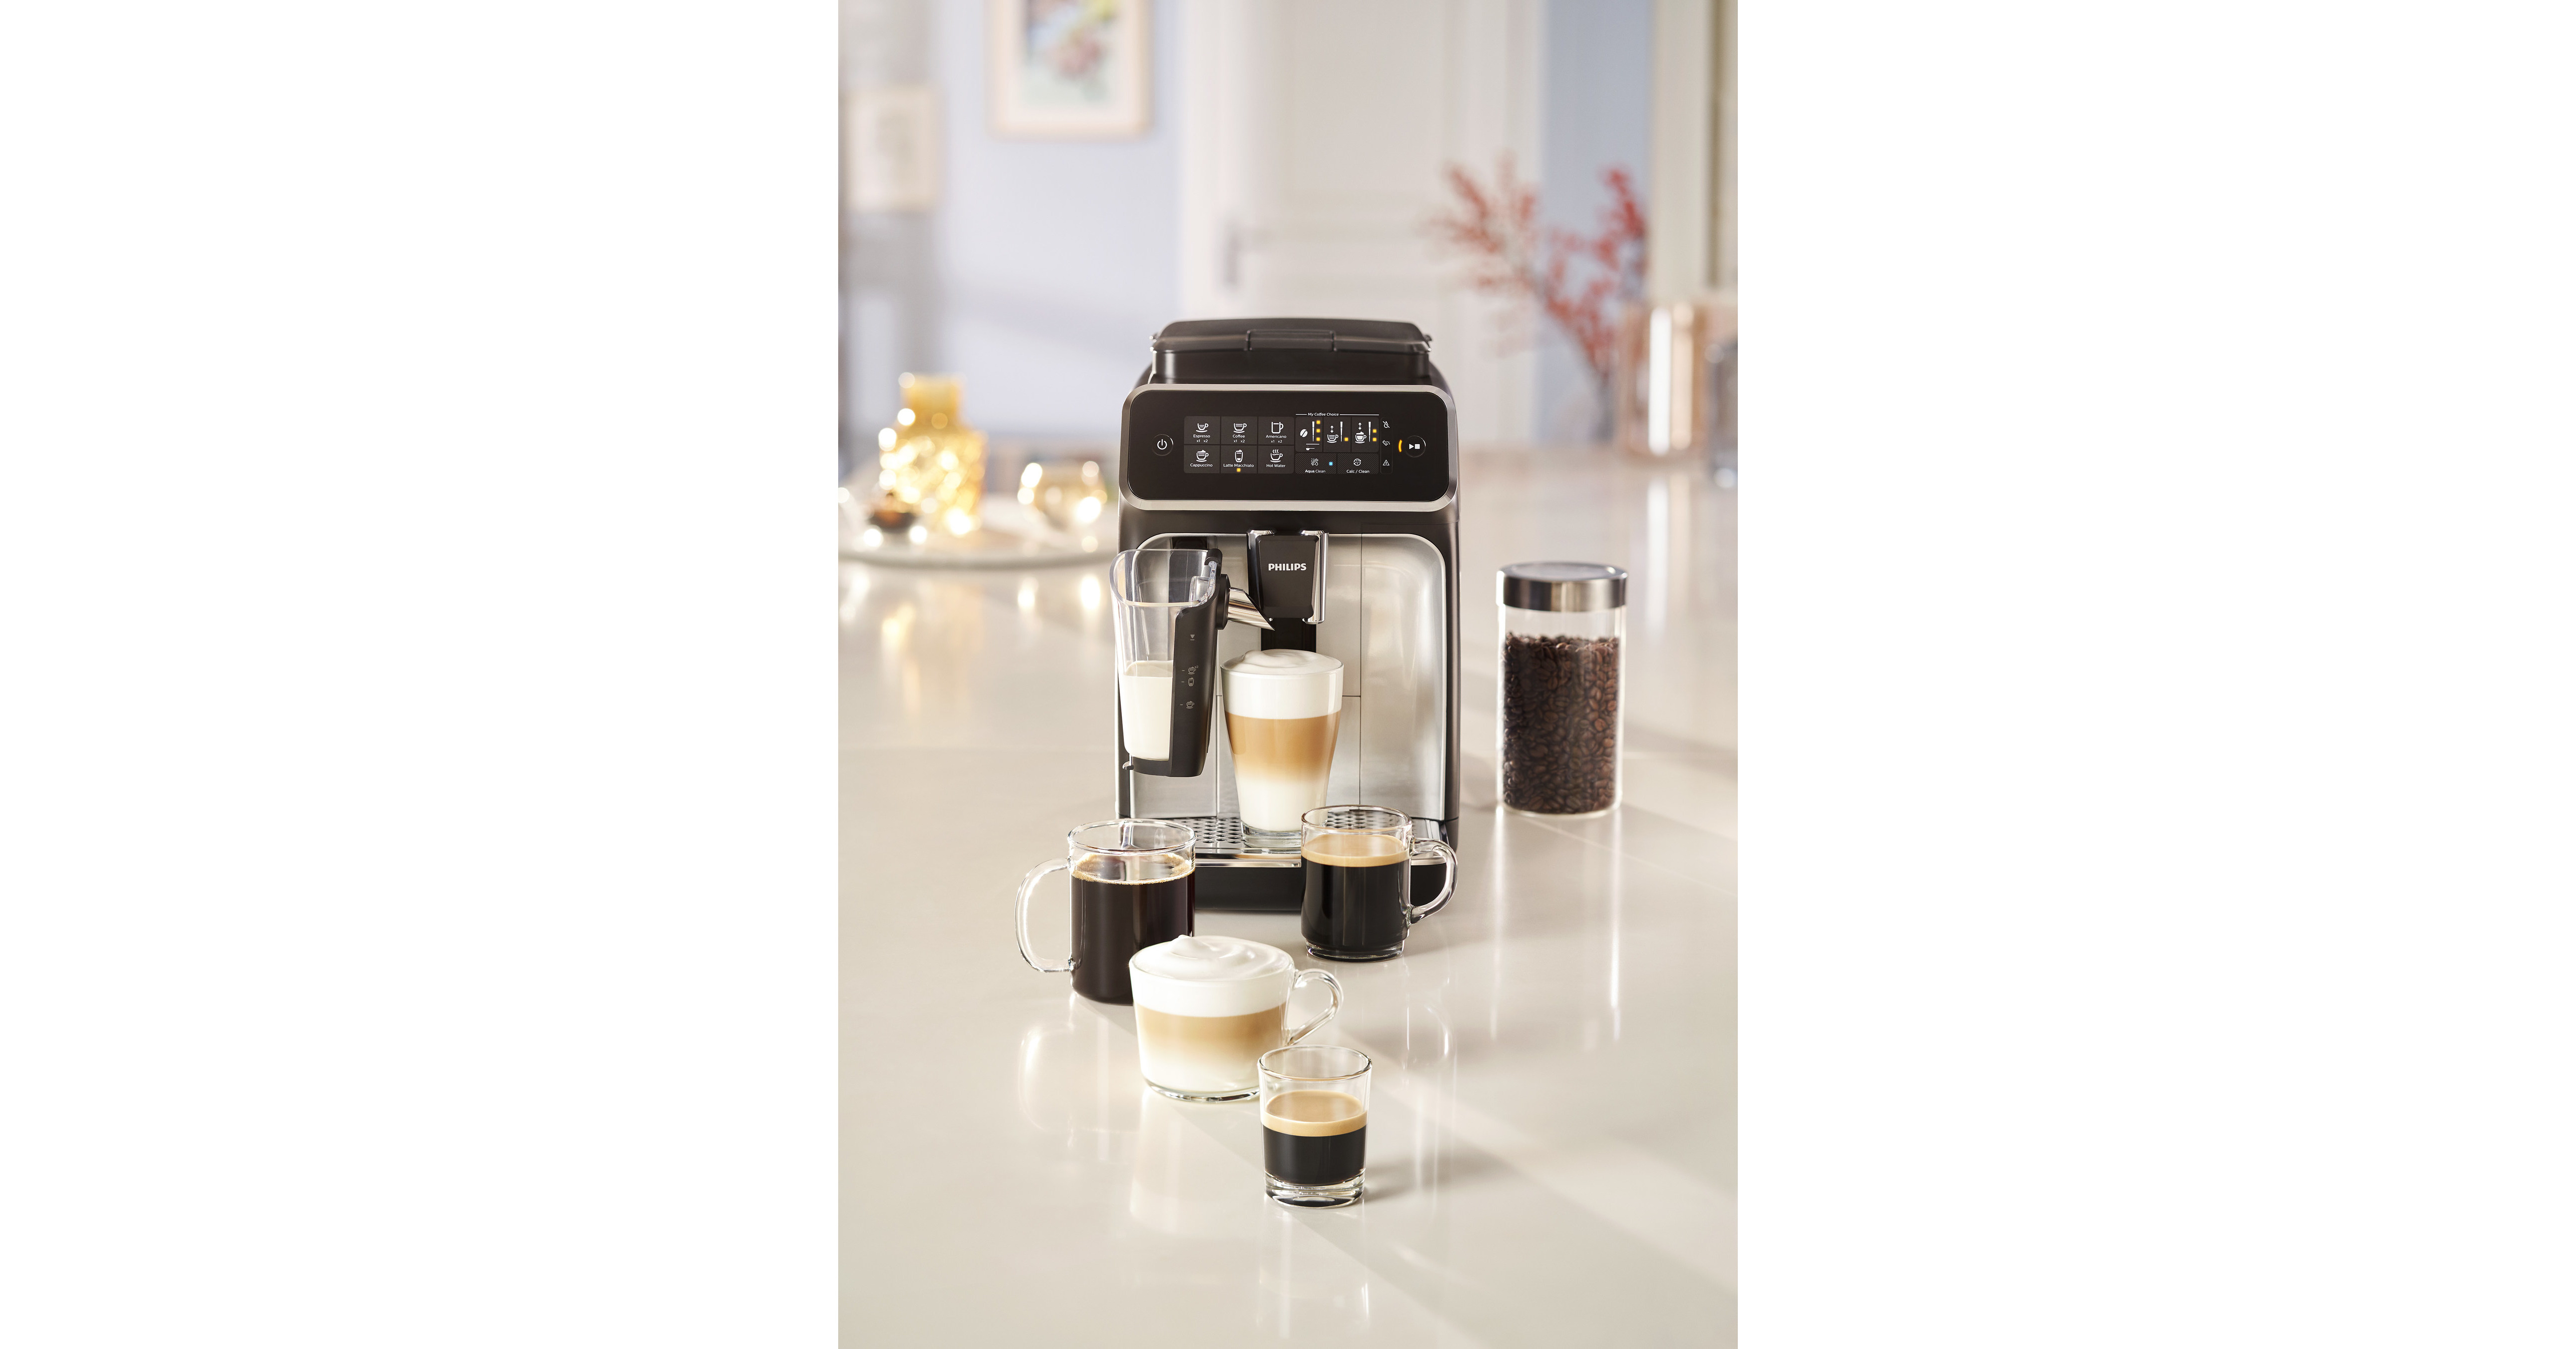 Denk vooruit mechanisme Biscuit New automatic espresso machines from Philips offer an easier way to make  café-style coffees at home